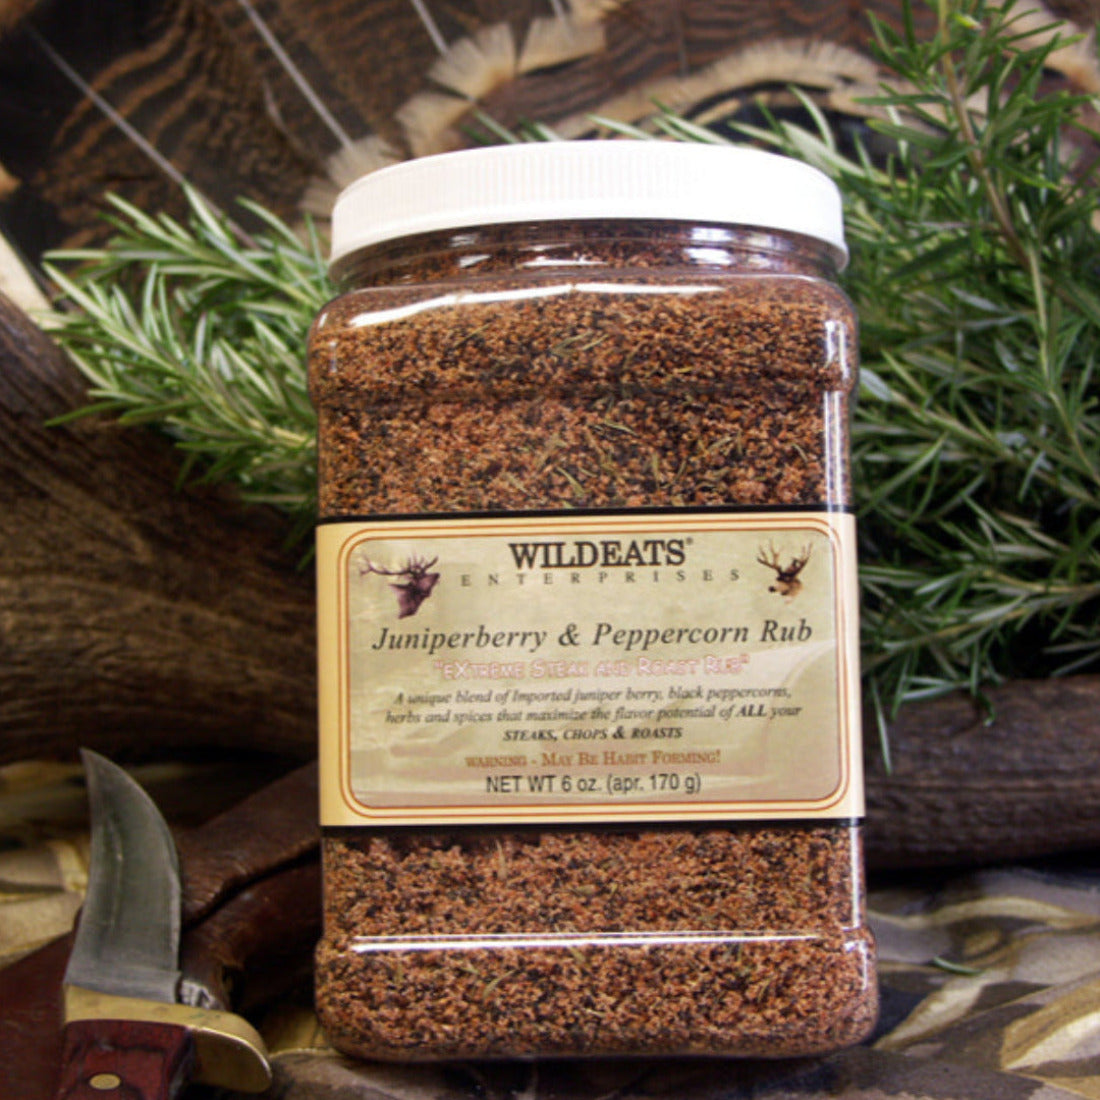 Juniperberry & Peppercorn Rub 40 ounce Our extreme steak and roast rub! The mother of ALL dry rubs... This is a robust, earthy blend that is designed to compliment the bold flavors of all full-flavored red meat. Beef, lamb, buffalo, venison, ducks and geese. Imported Italian juniper berries, tellicherry black peppercorns, herbs, sea salt and spices are used to achieve an addictive balance of flavor and complexity. Great for steaks, roasts or stews.  Includes Bonus Recipe